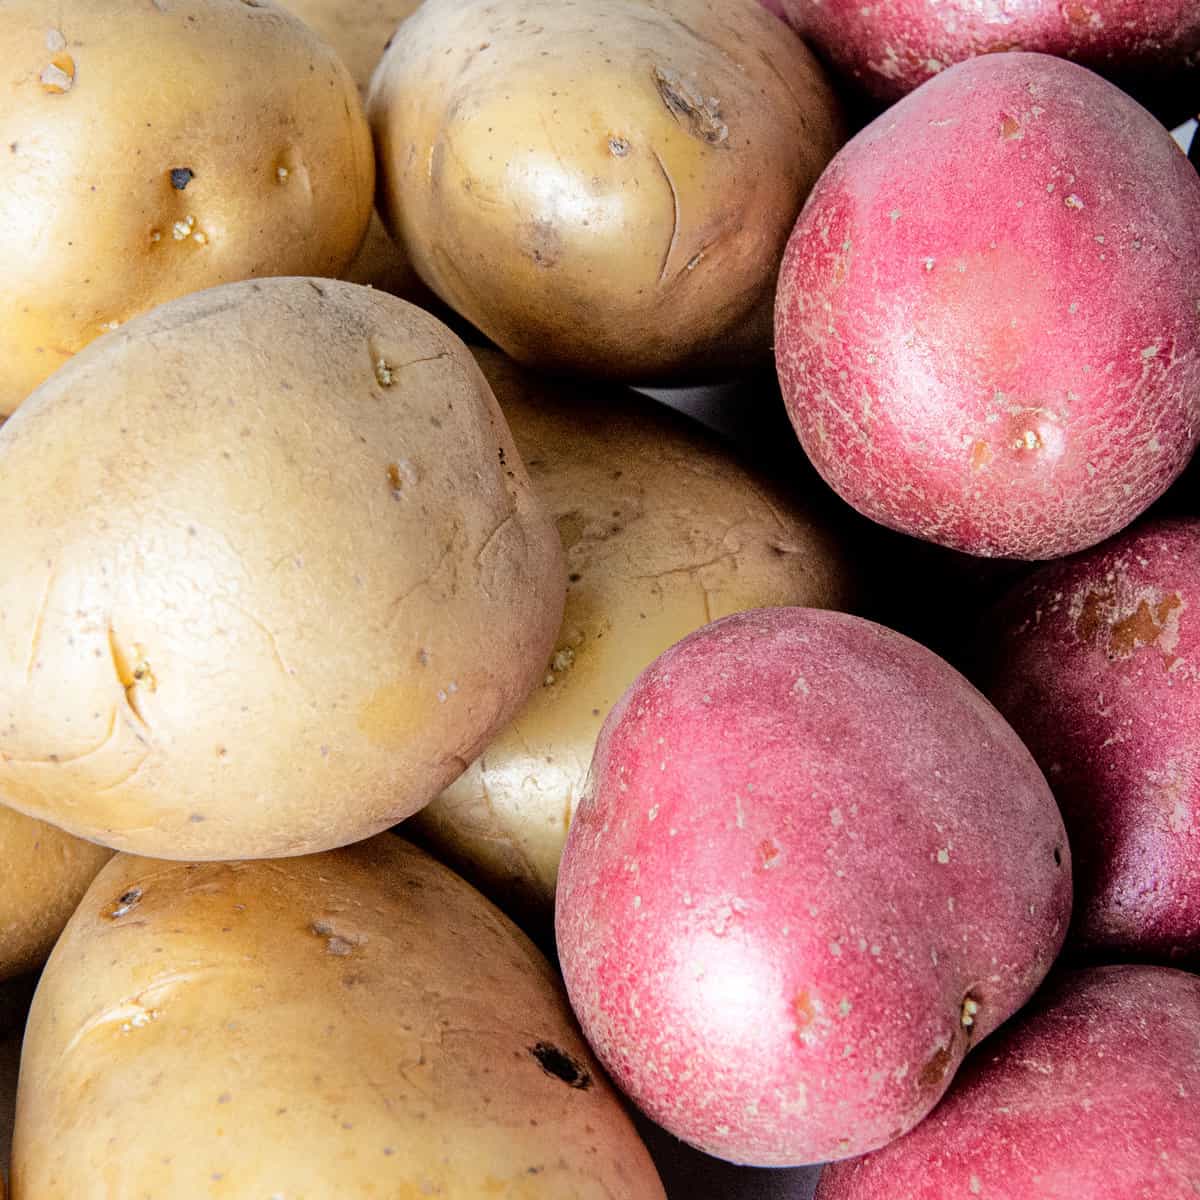 Close up view of potatoes.